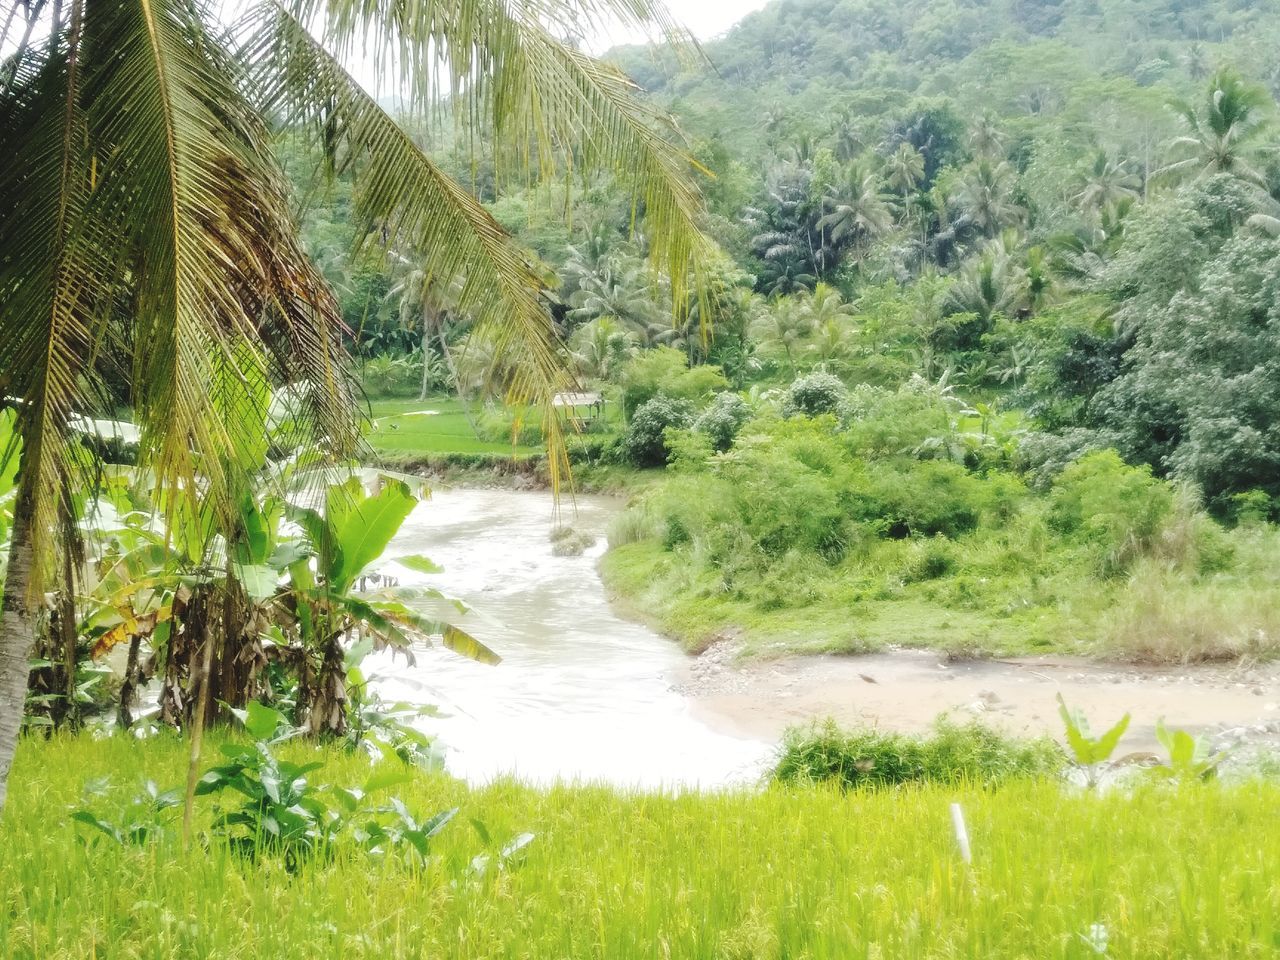 plant, tree, green, beauty in nature, vegetation, growth, water, scenics - nature, nature, tranquility, natural environment, land, tranquil scene, day, no people, jungle, environment, grass, rainforest, non-urban scene, landscape, river, forest, nature reserve, valley, tropical climate, idyllic, outdoors, lush foliage, wilderness, palm tree, foliage, mountain, field, remote, wetland